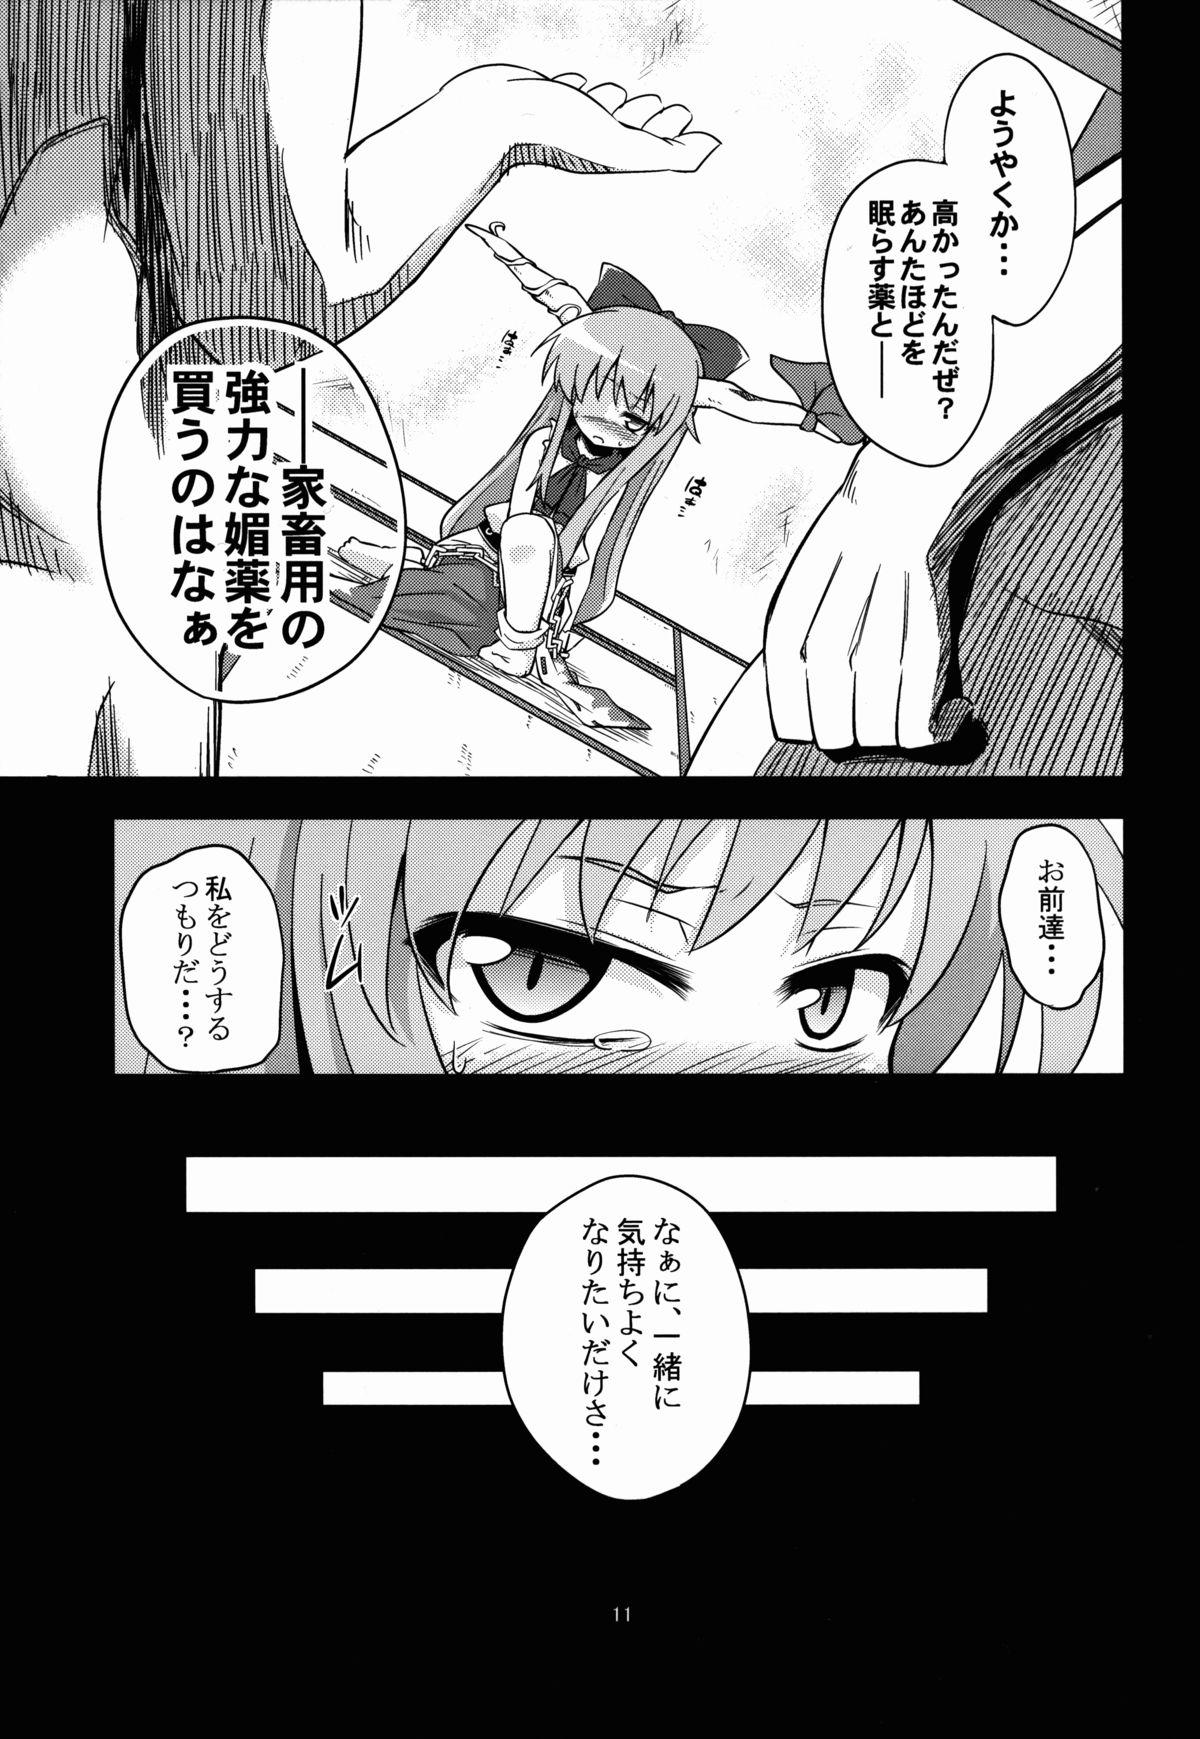 Pickup 鬼犯嘘犯喜 - Touhou project Rough Sex - Page 11